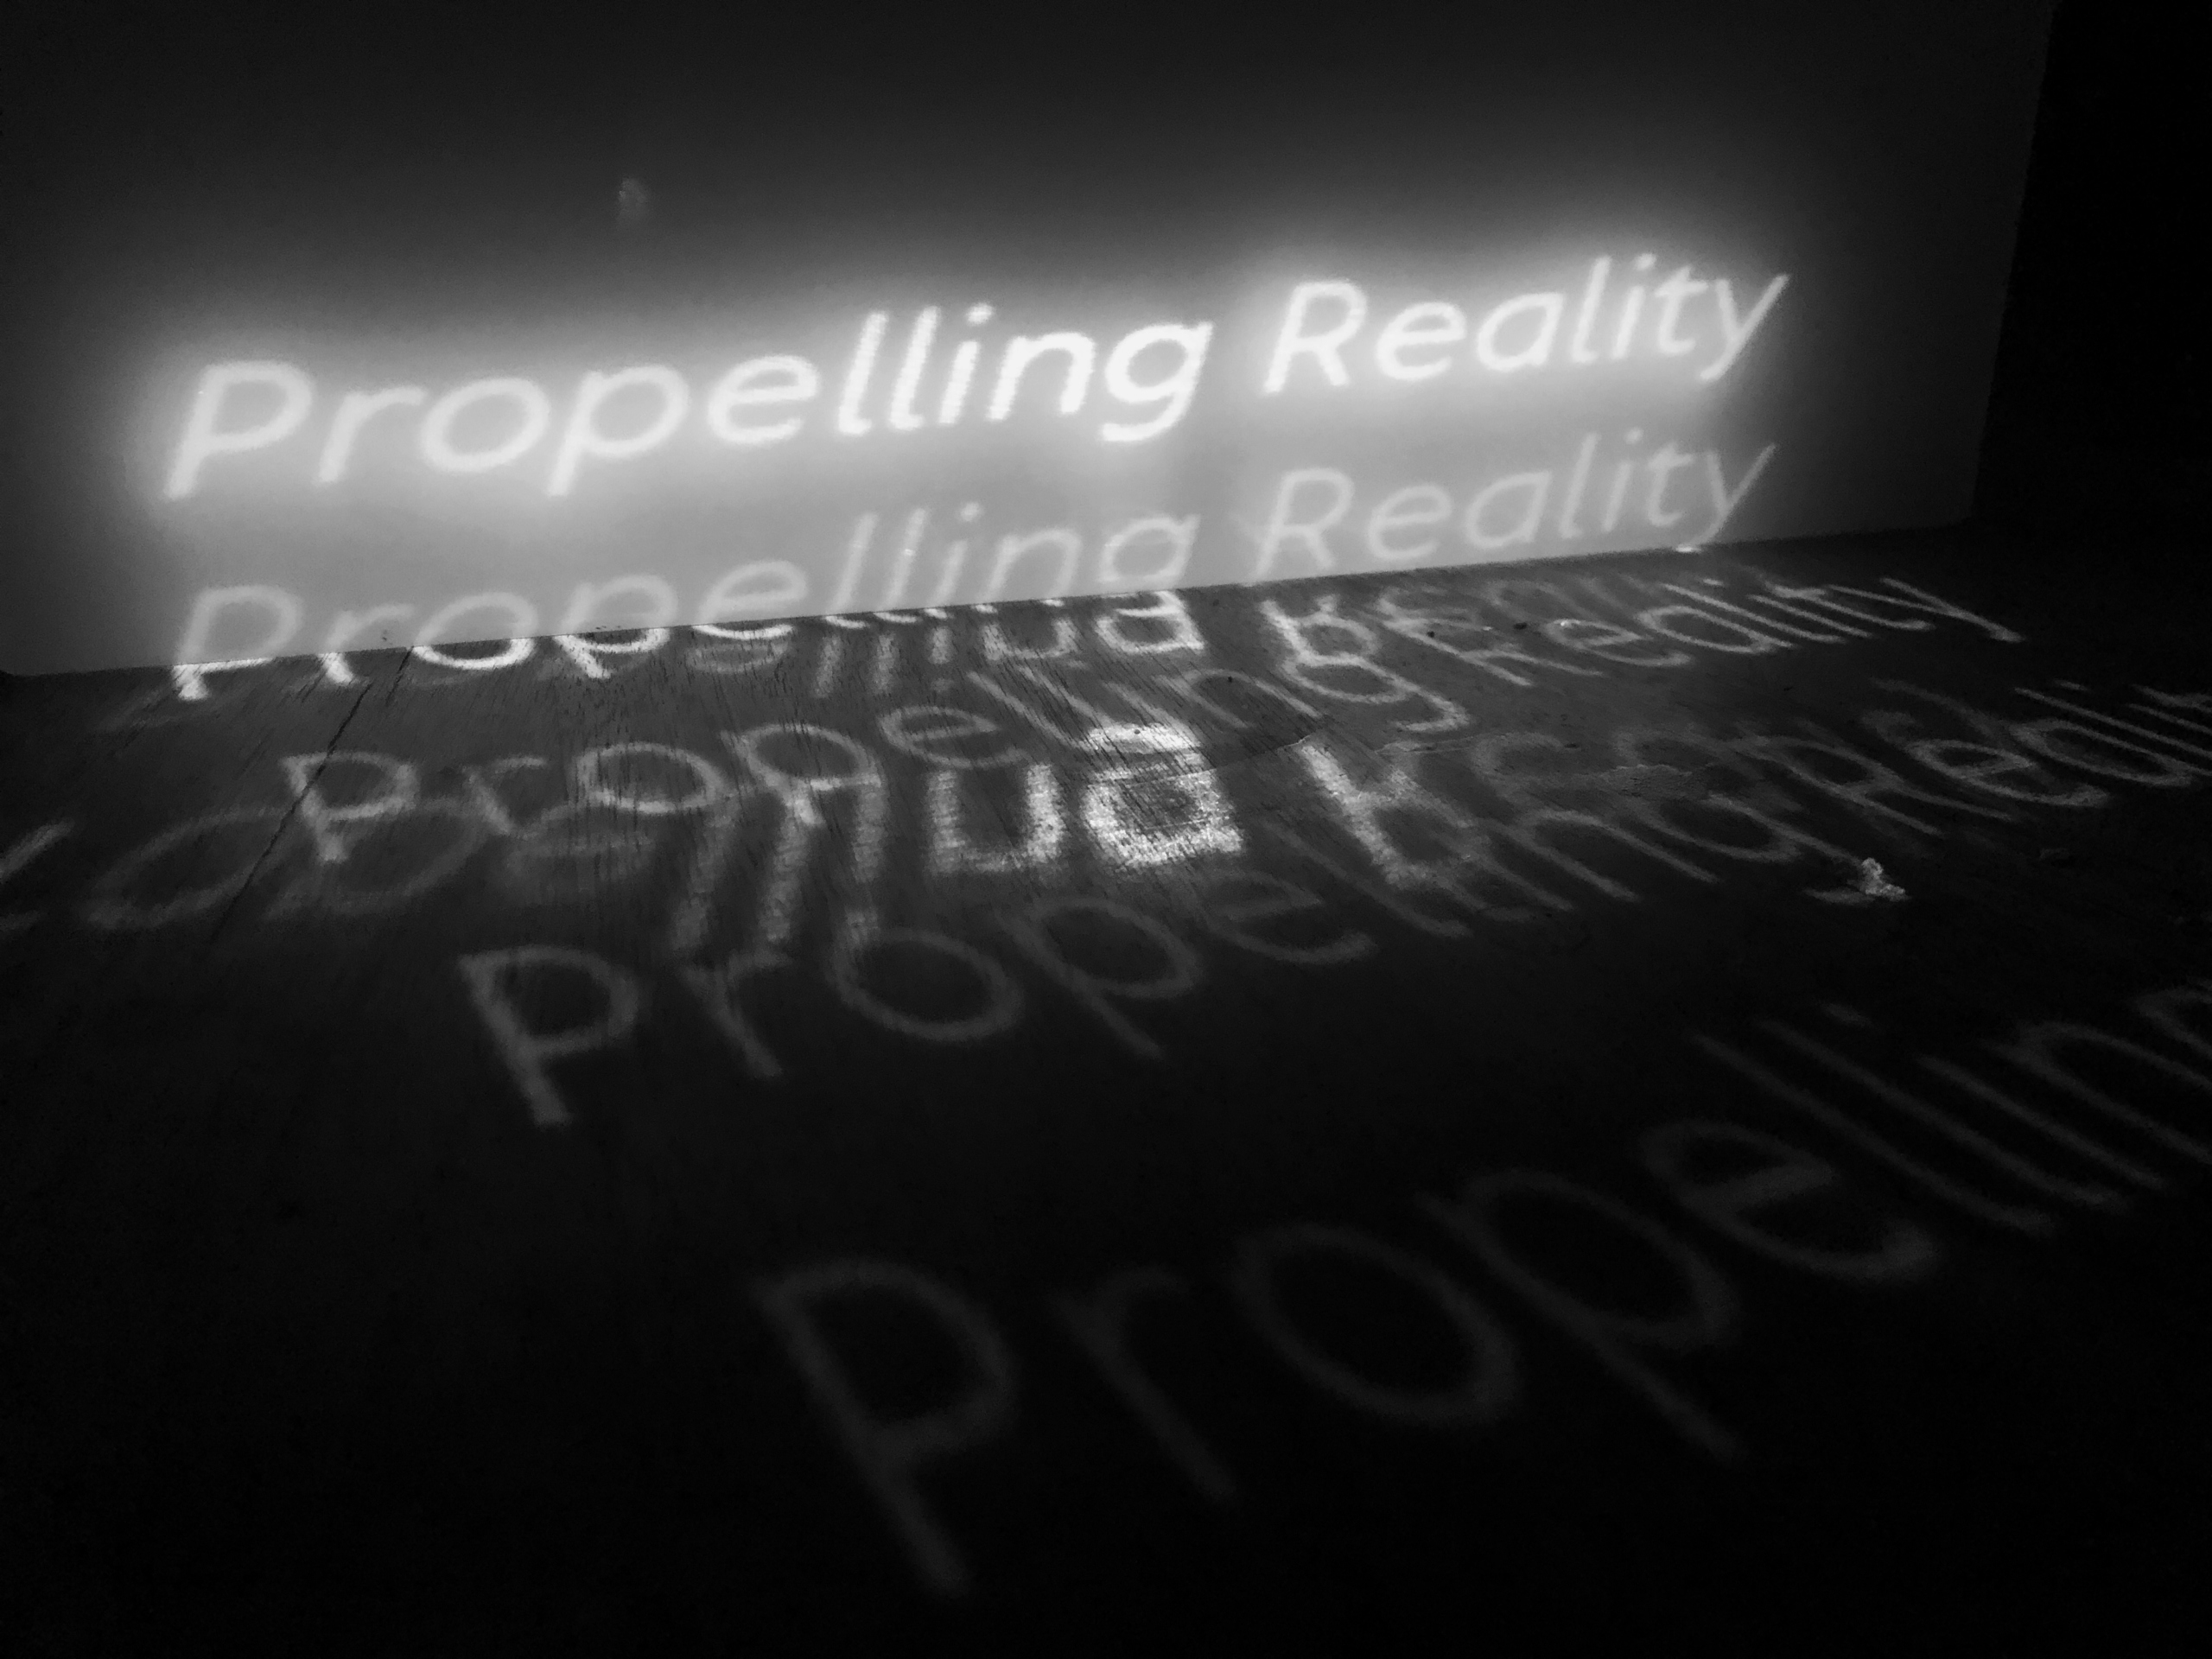 Propelling Reality